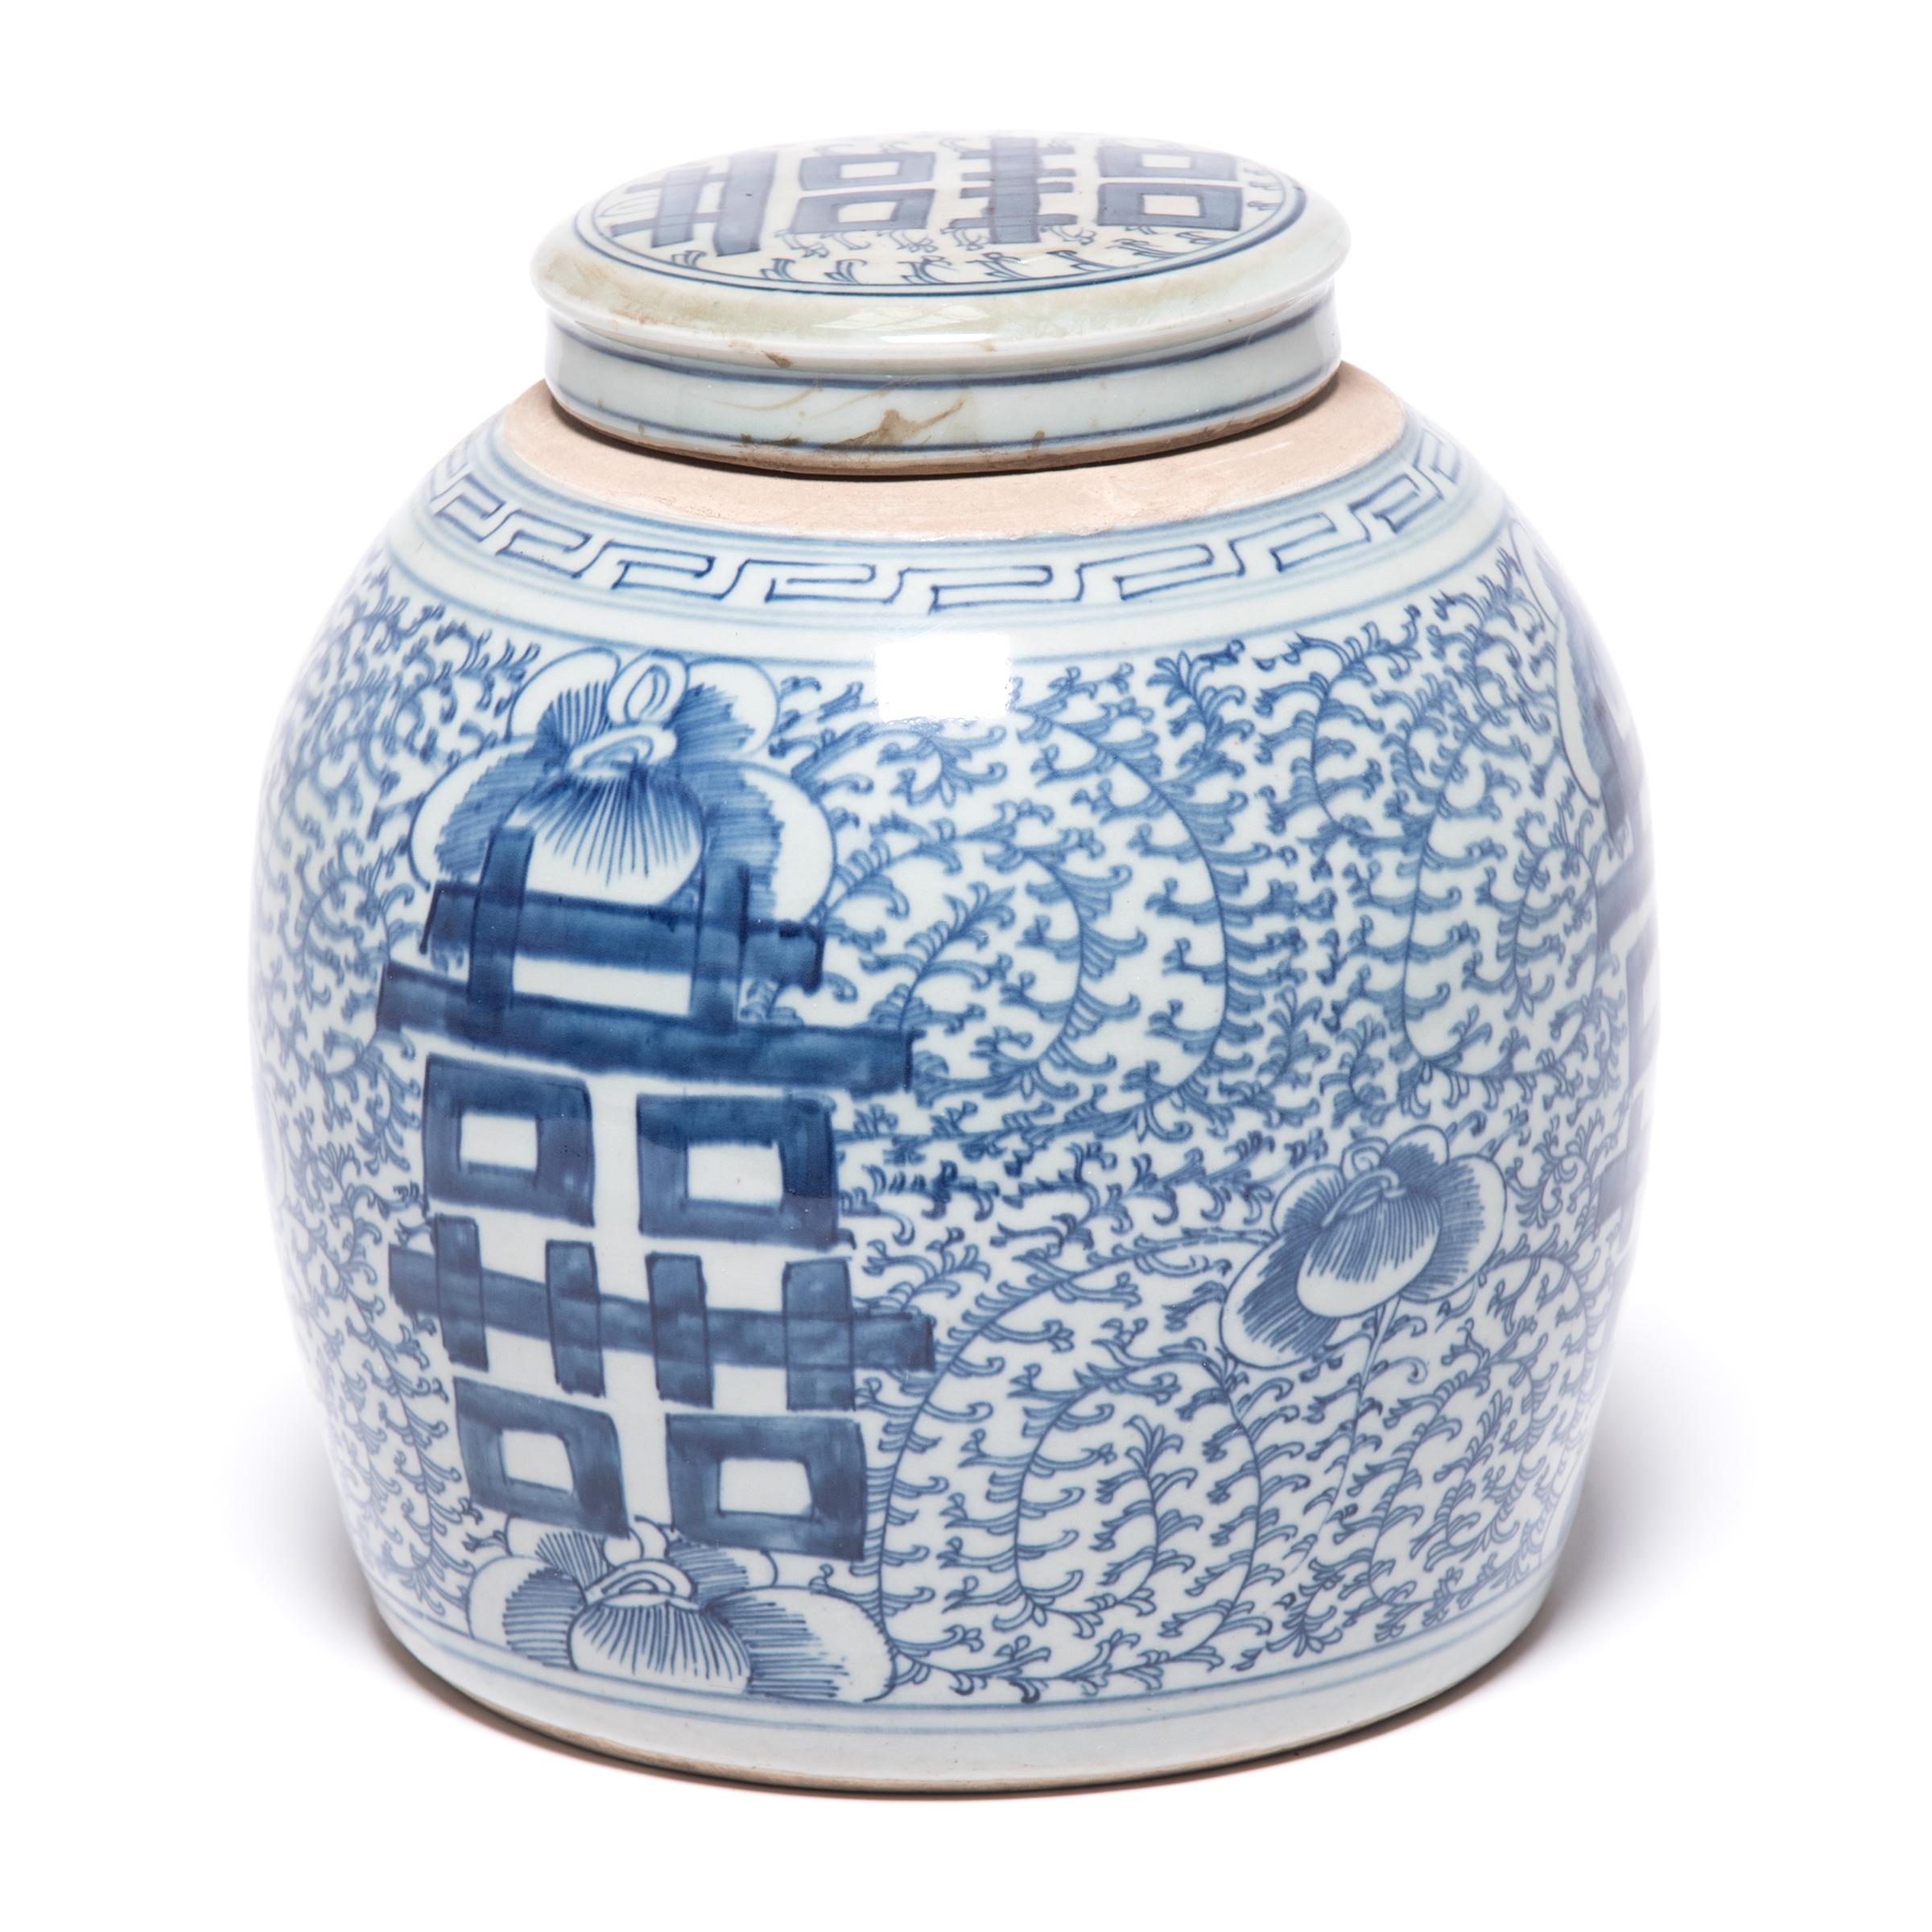 Glazed Chinese Blue and White Double Happiness Covered Jar